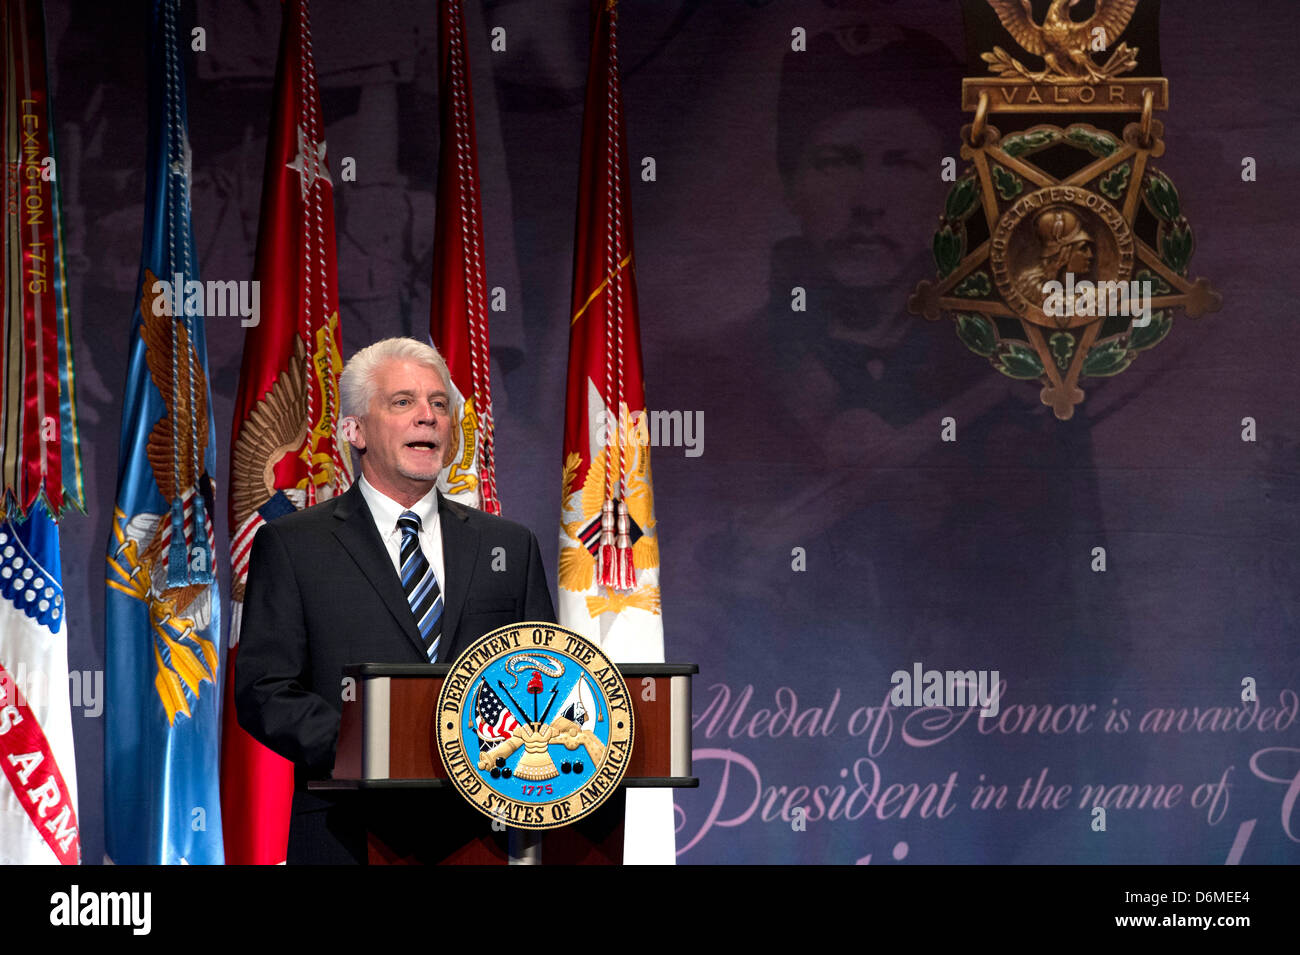 Ray Kapaun speaks during a ceremony inducing his uncle, Army Chaplain Emil Kapaun, into the Hall of Heroes at the Pentagon April 12, 2013 in Arlington, VA. Stock Photo